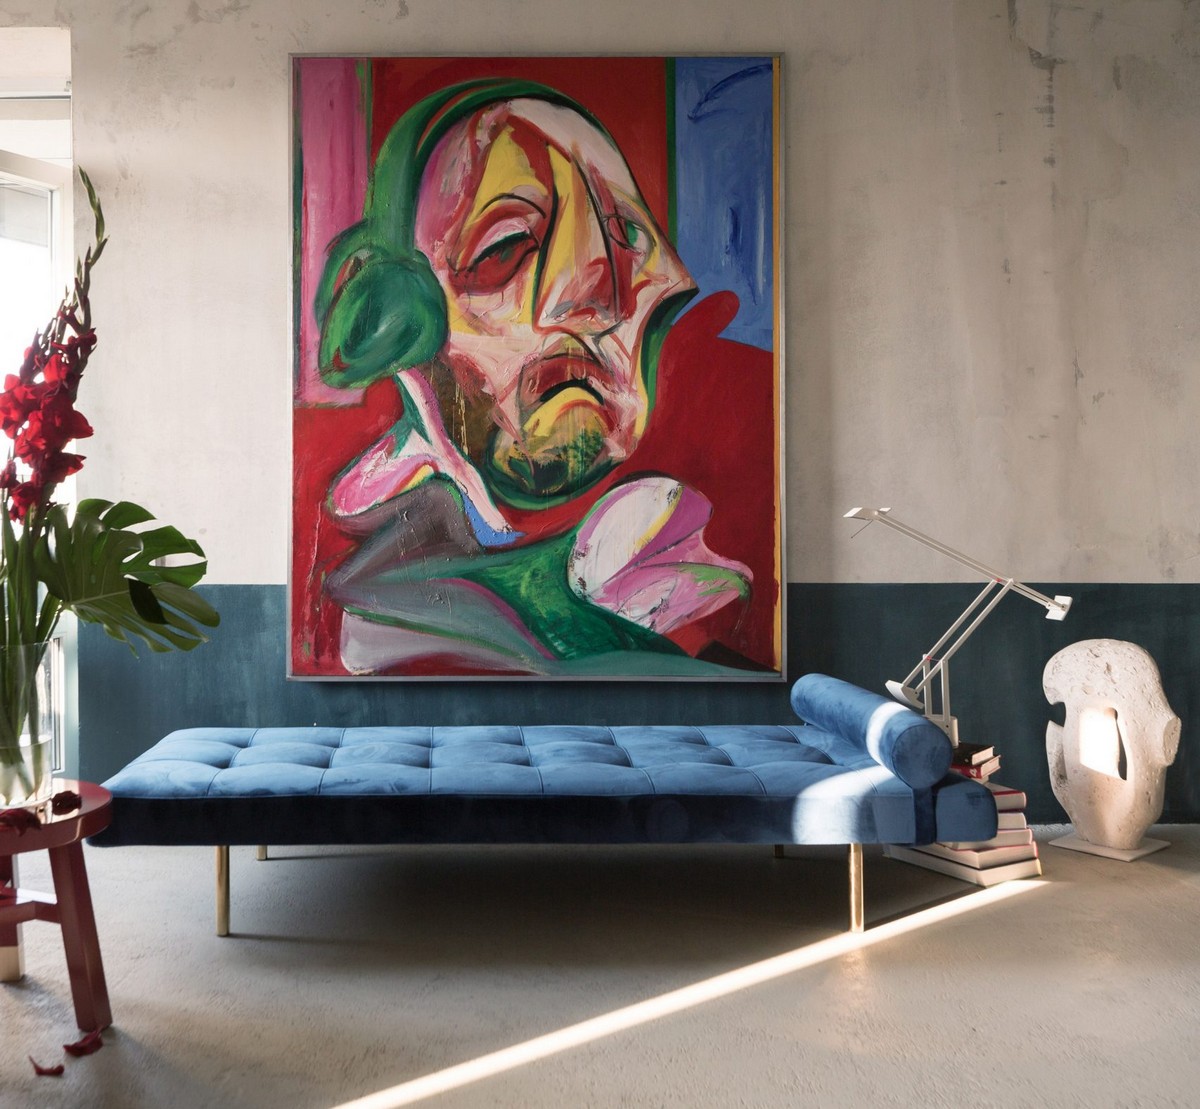 Color and Texture Bring Personality Into Minsk's Workspace | Studio 11 combine industrial finishes with plush furnishings and colorful art to create the interior of Minsk own workspace. #interiordesign #homedecor #moderndecor #colorandtexture